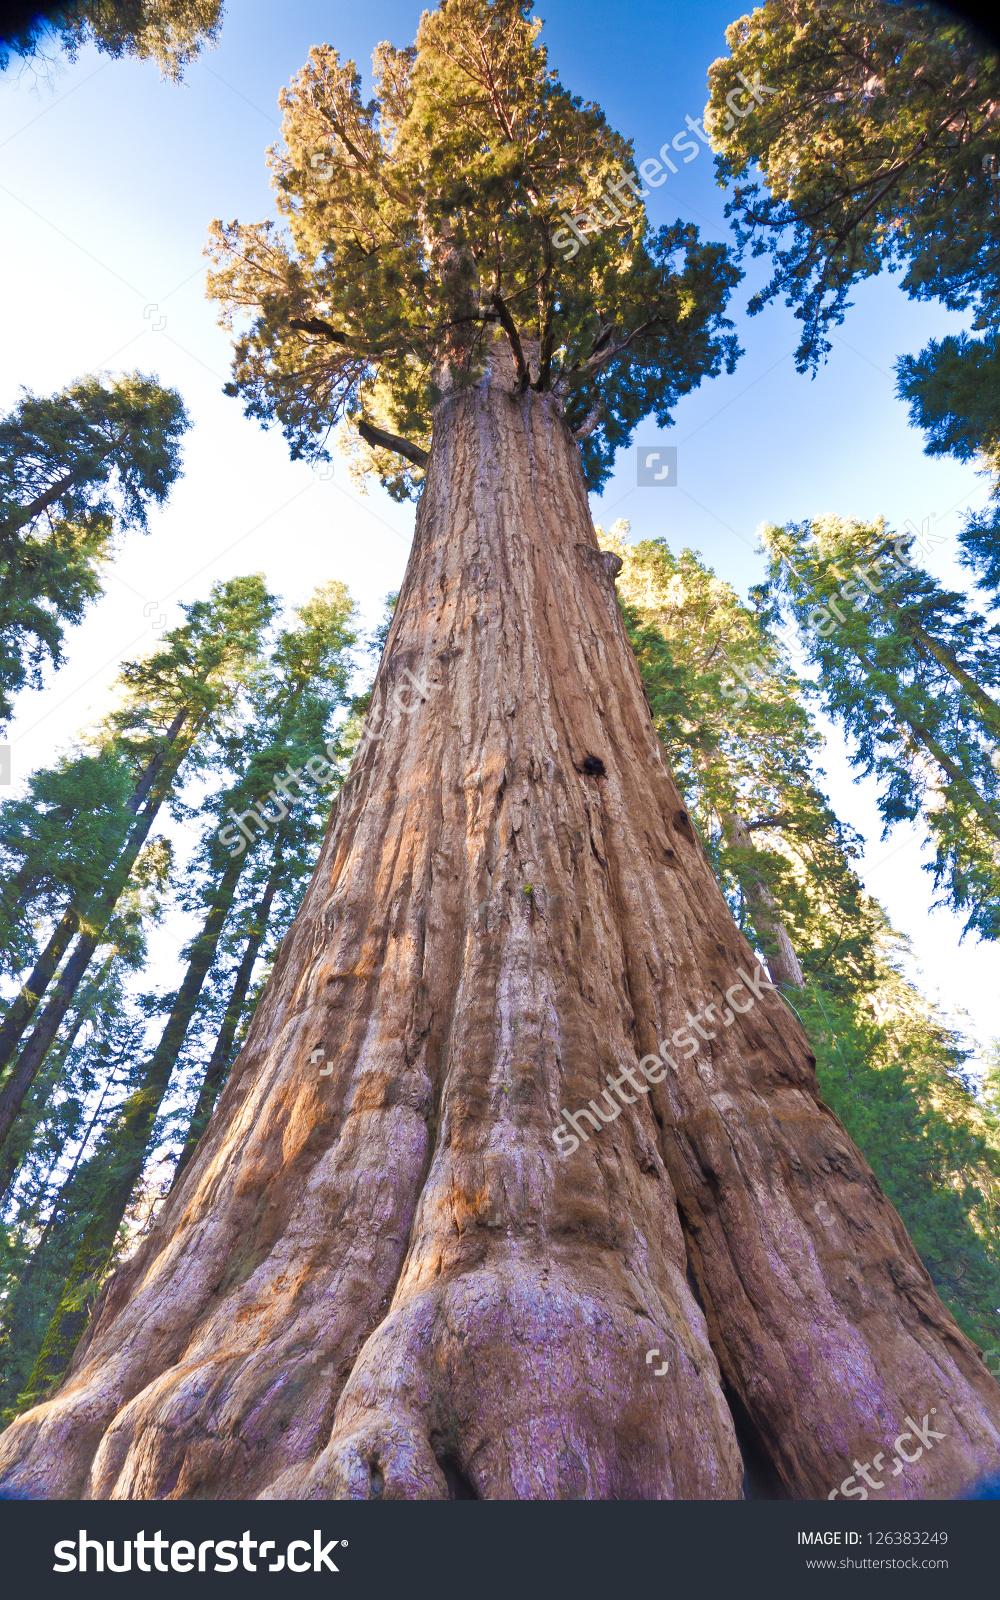 Sequoia National Park clipart #4, Download drawings